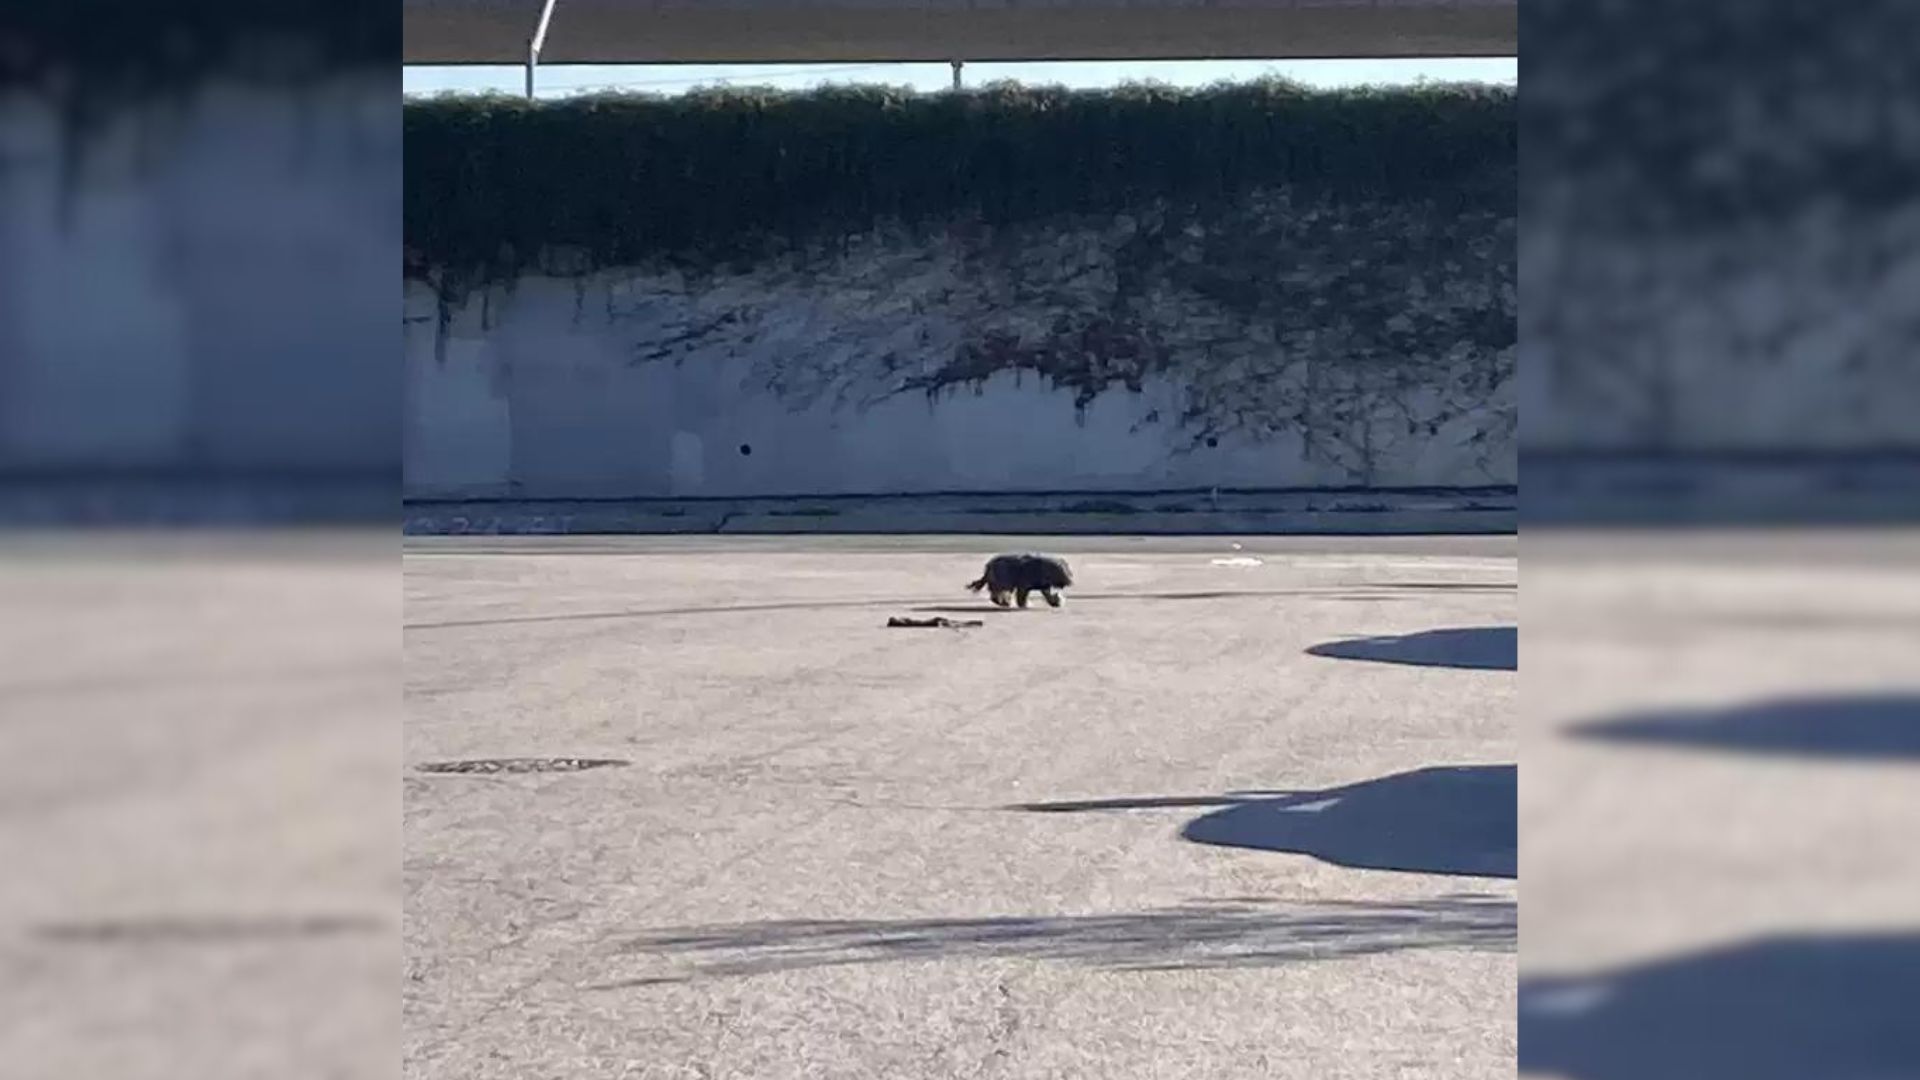 Woman Stumbles Upon Mysterious Animal Near Busy Highway And Immediately Rushes To Help